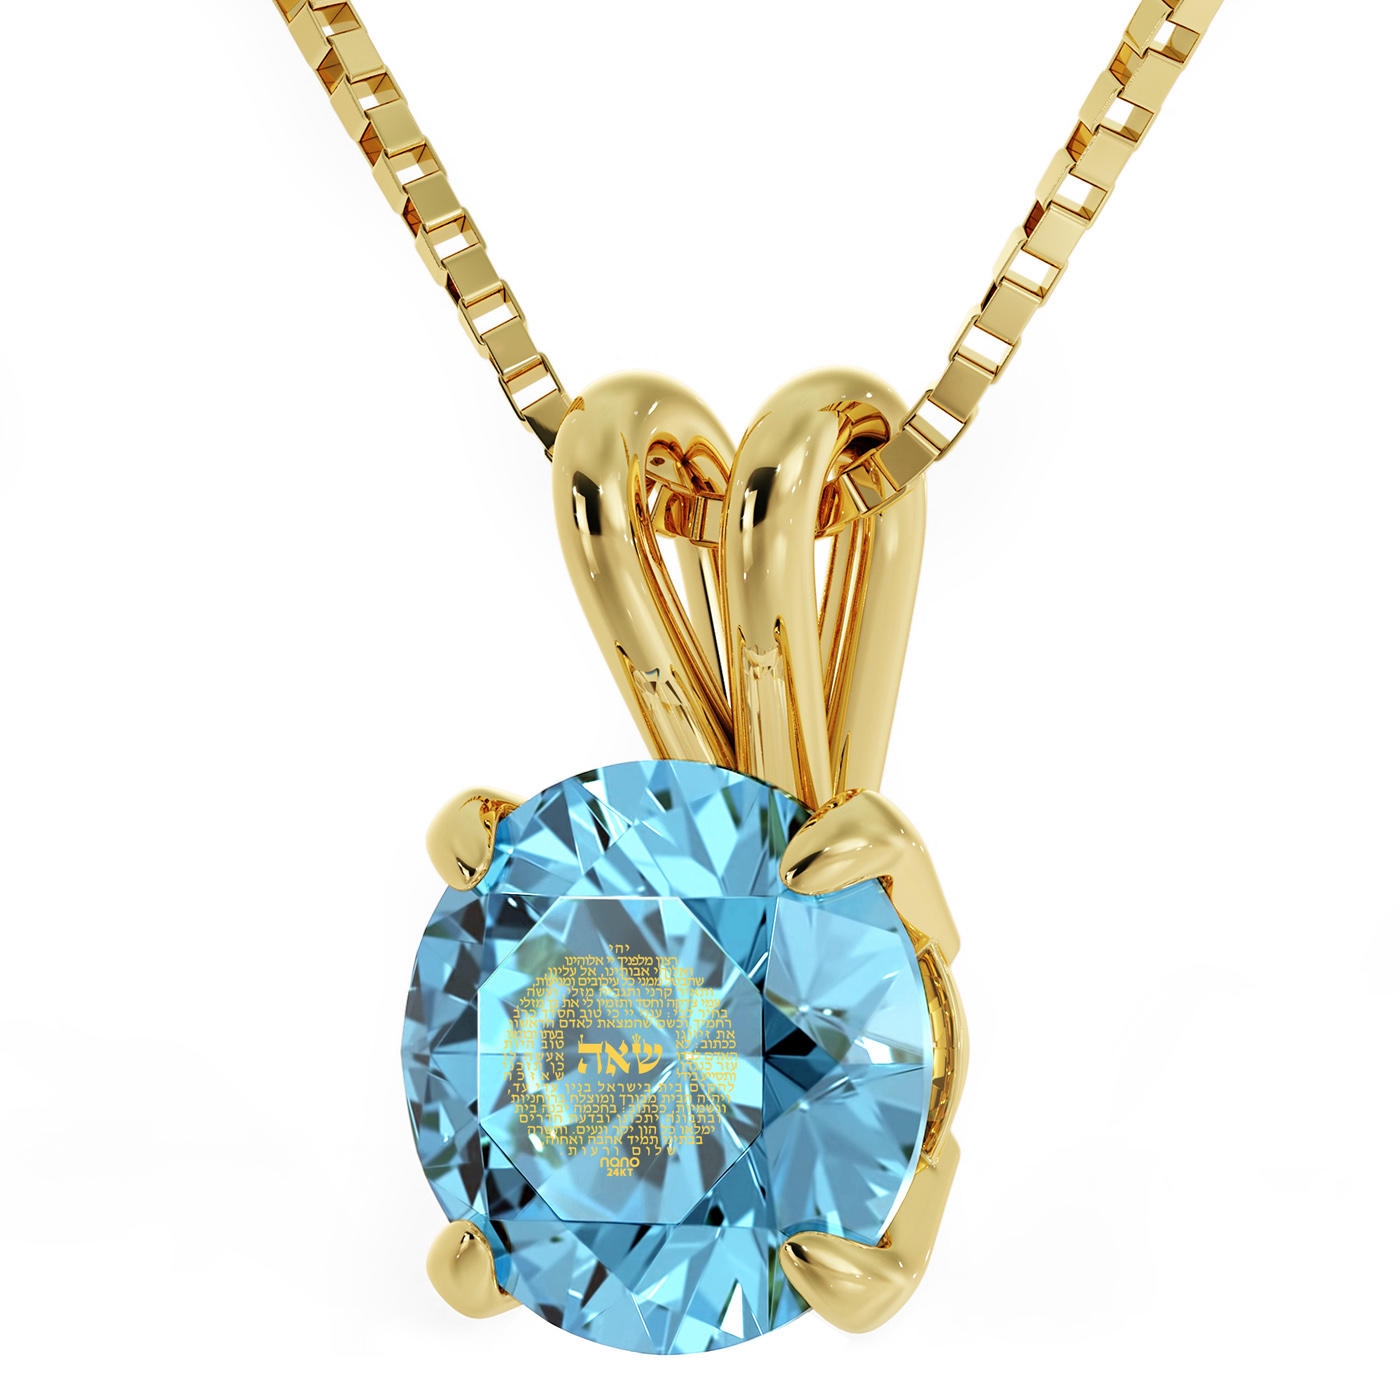 Soulmate: 24K Gold Plated and Swarovski Stone Necklace Micro-Inscribed with 24K Gold - 1